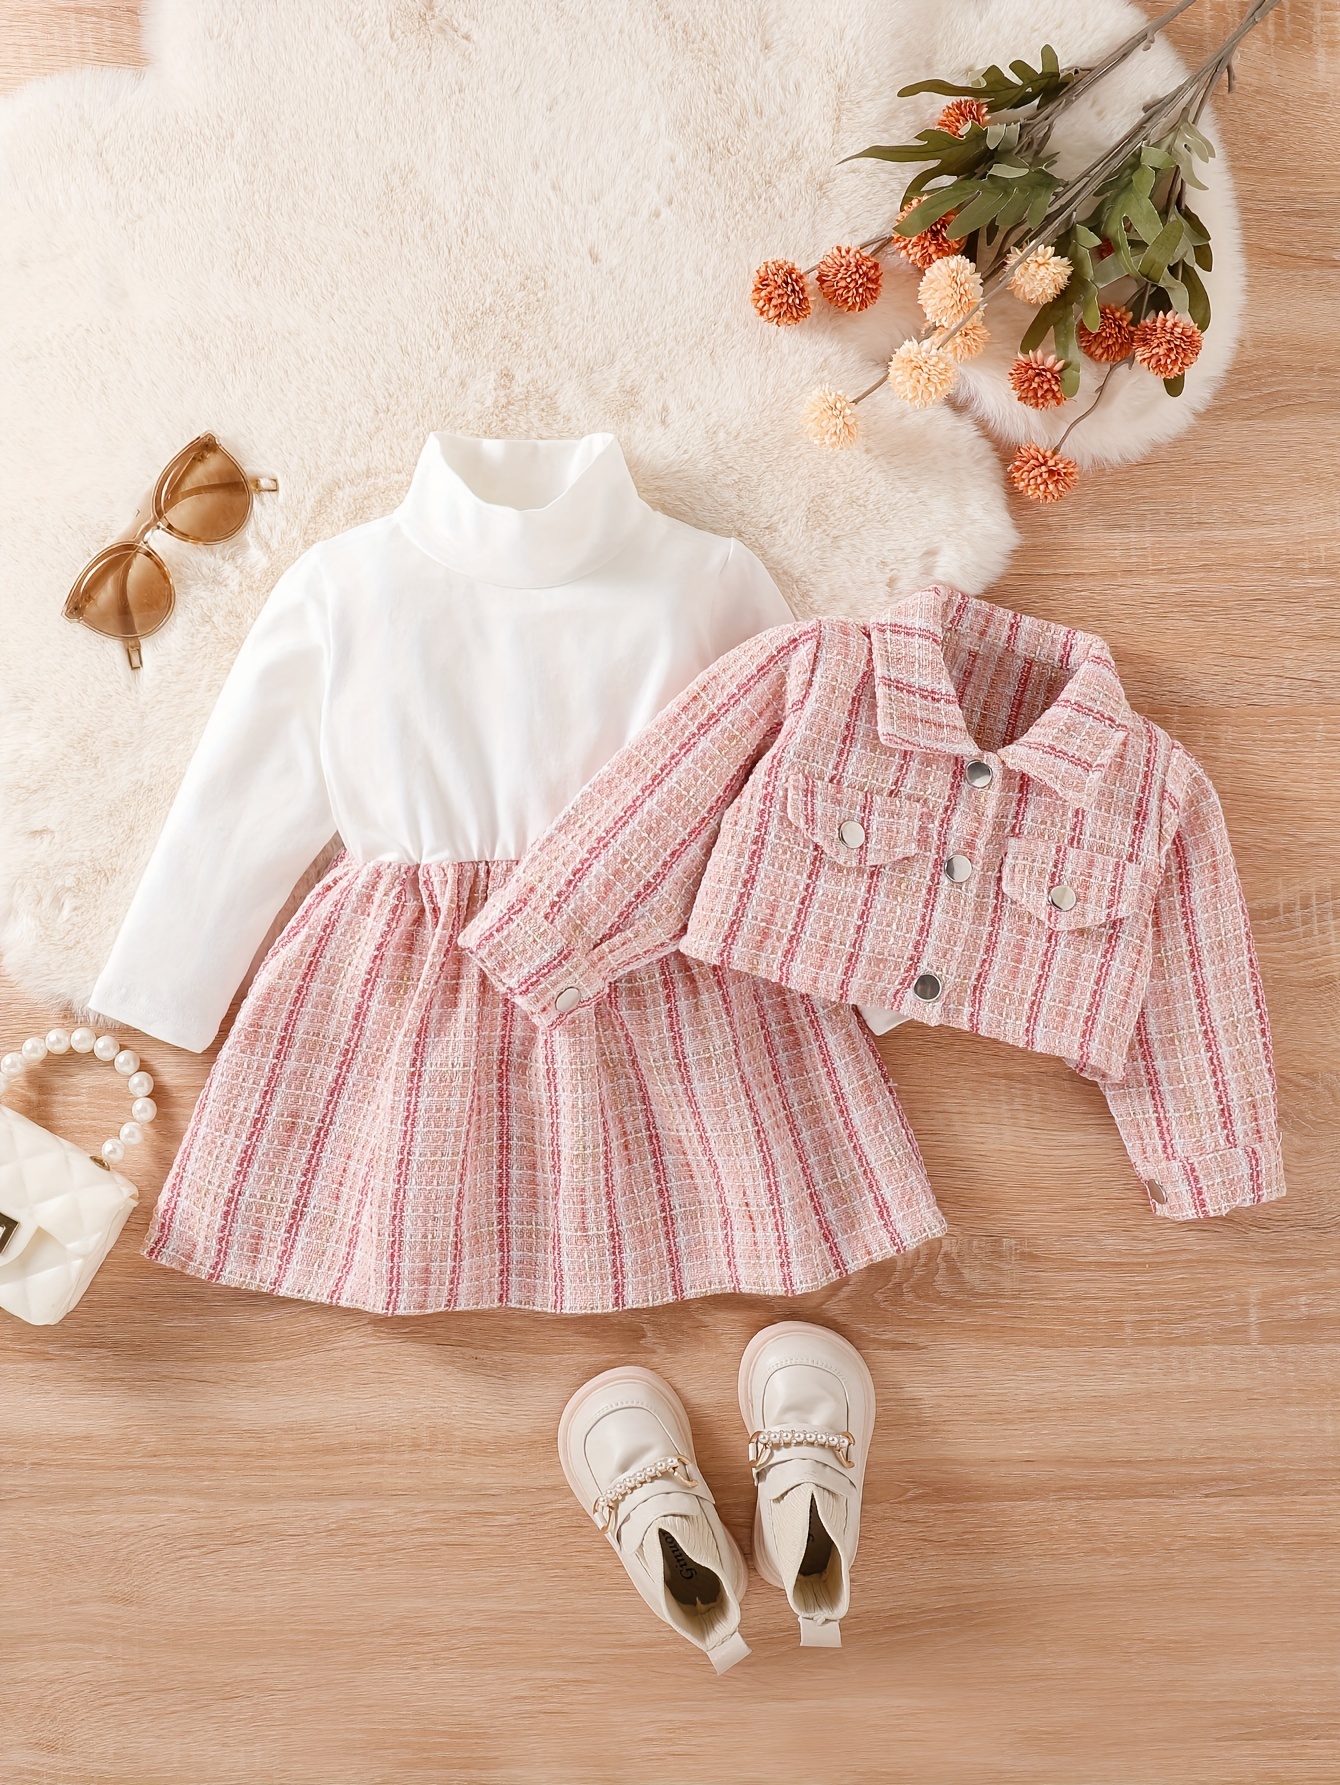 Baby Girl Stylish Casual 5pcs Outfits - Long Sleeve Jumpsuit & Plaid Skirt  & Belt & Hat & Scarf Set, Kids Clothes Autumn And Winter